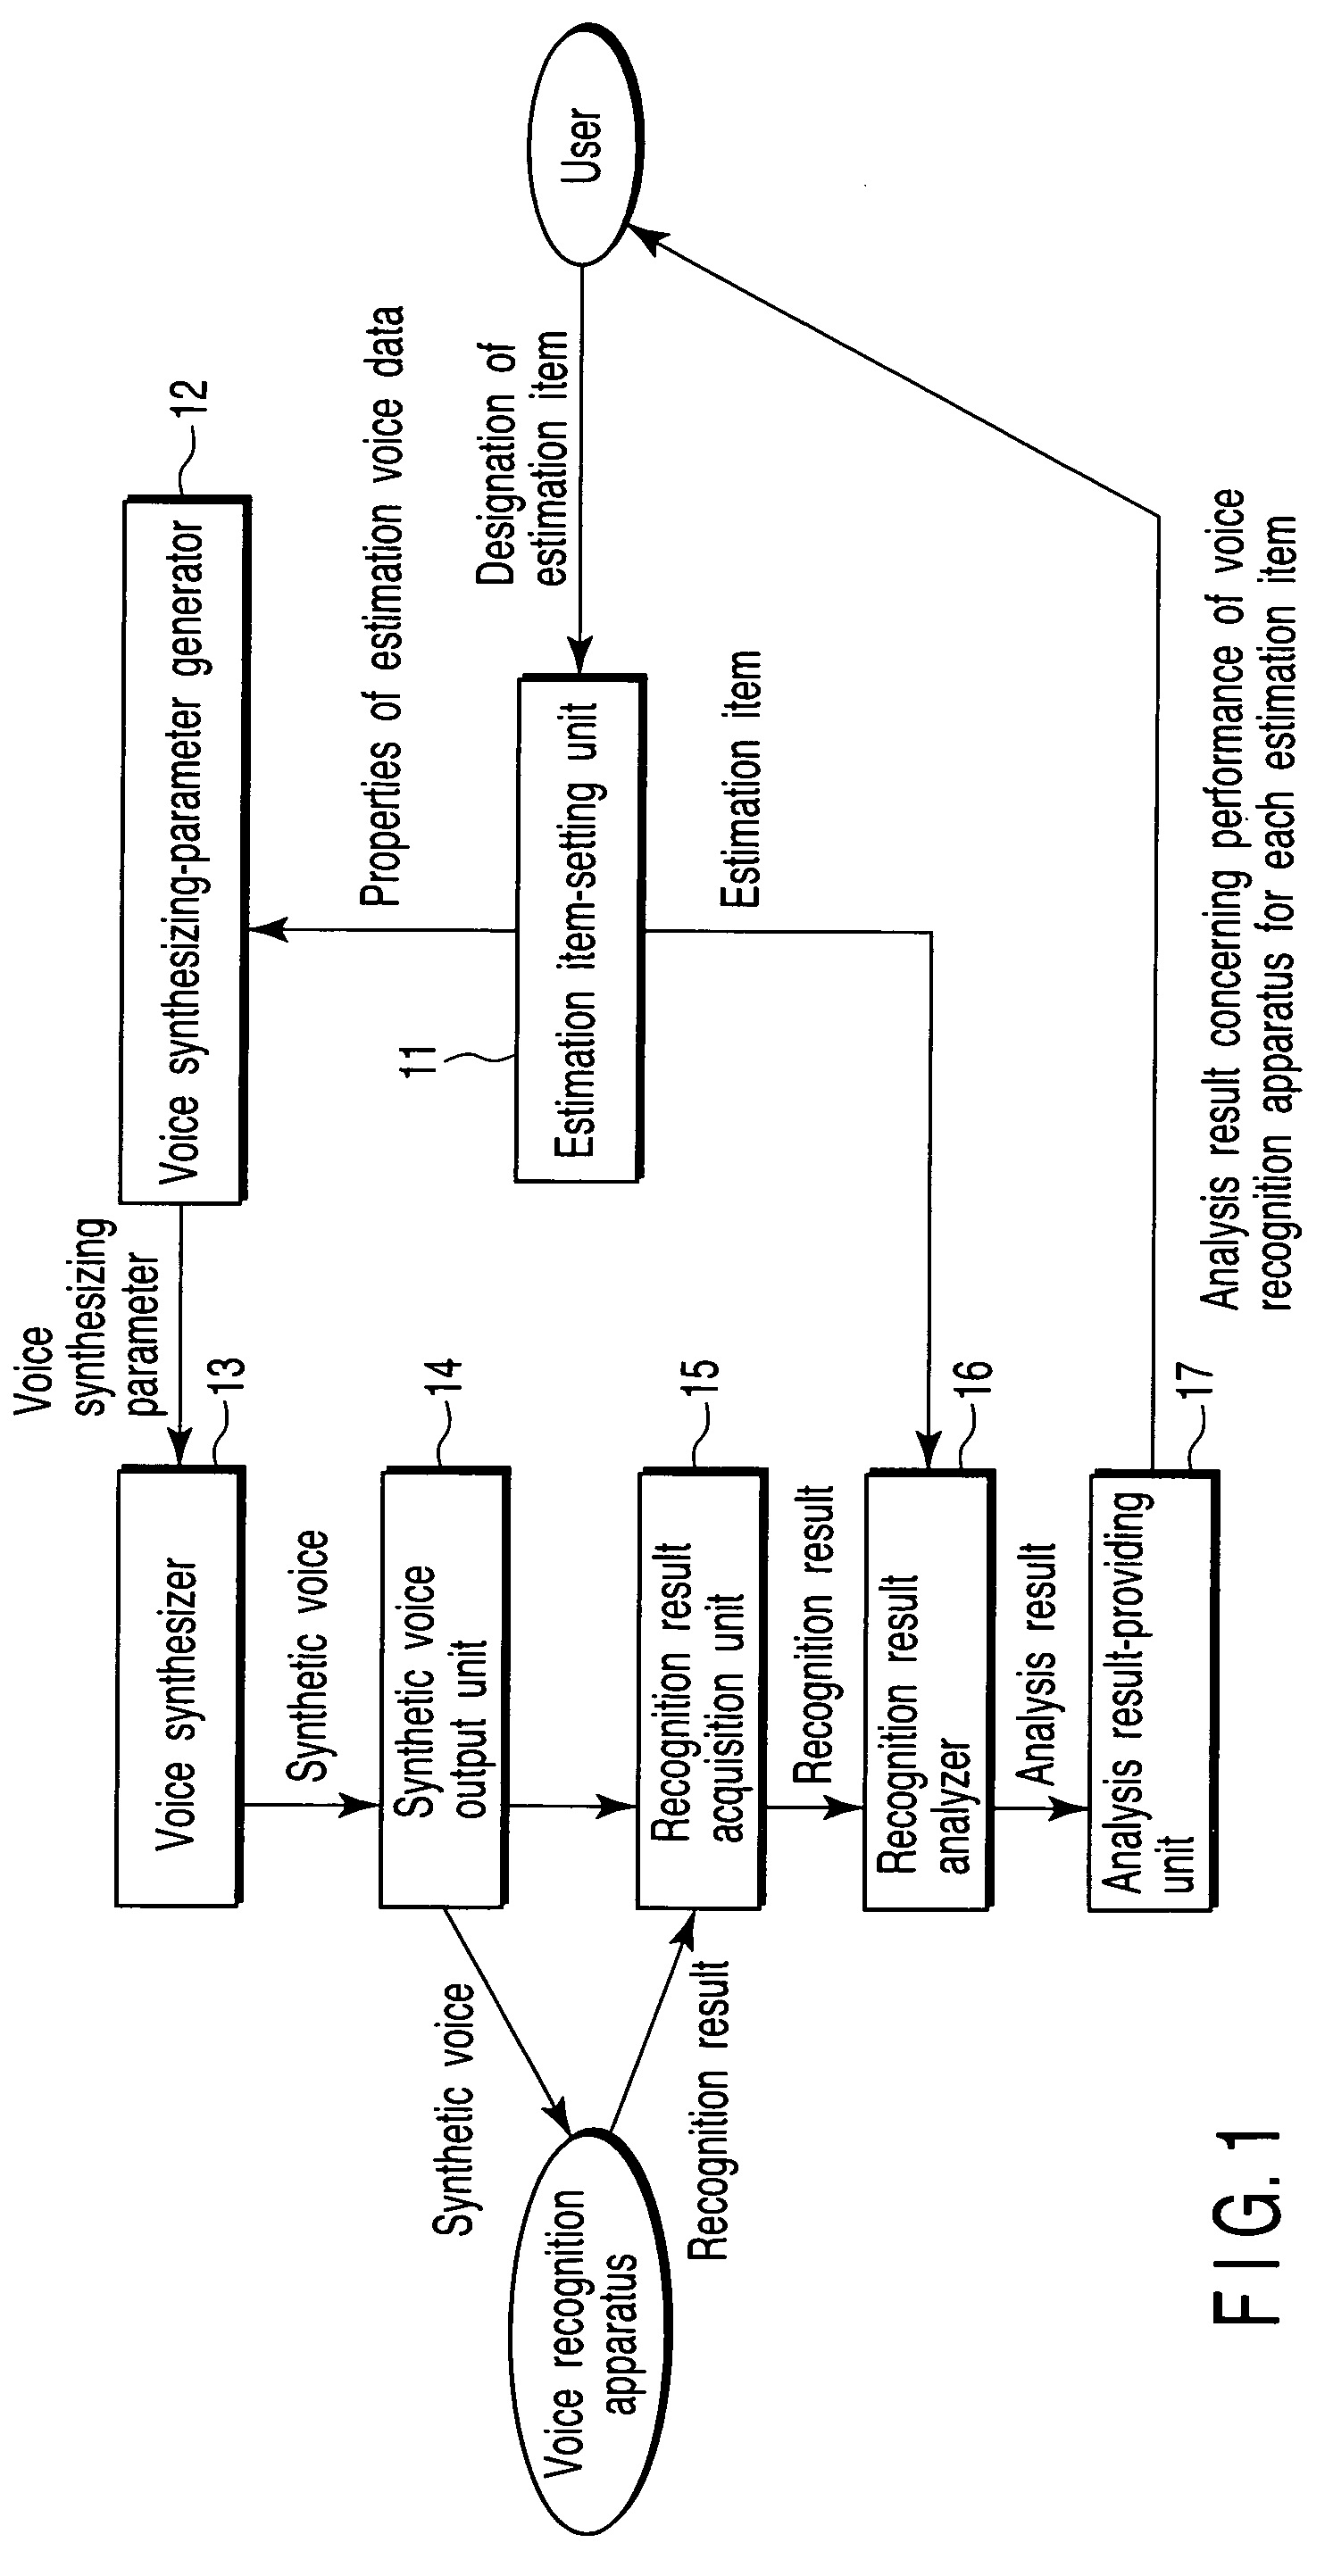 Voice recognition performance estimation apparatus, method and program allowing insertion of an unnecessary word